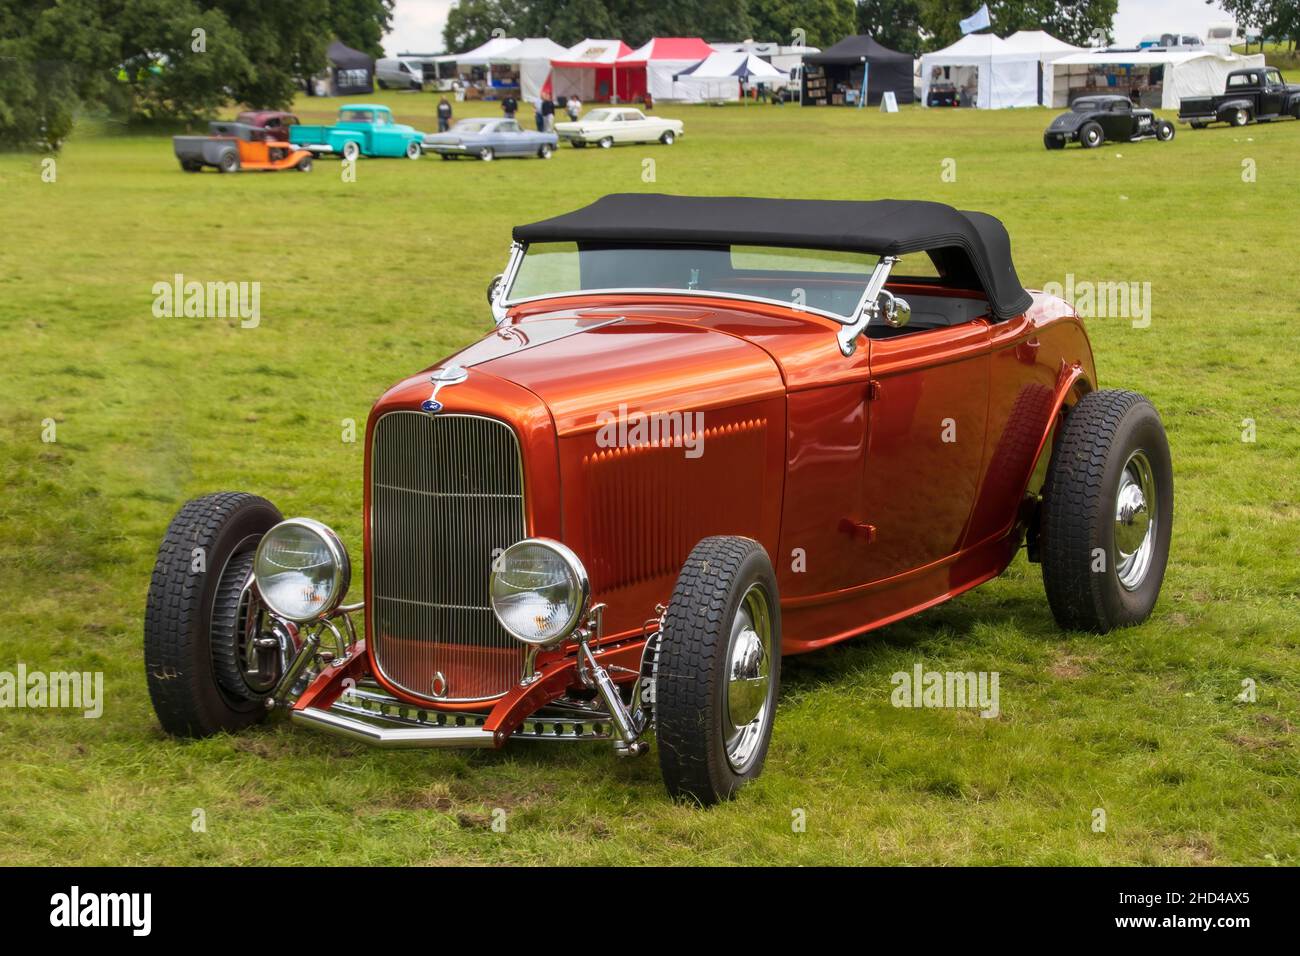 Old Warden, Bedfordshire,UK - 8th August 2021: Red Ford Hot Rod convertible car at the NSRA Supernationals. High quality photo Stock Photo